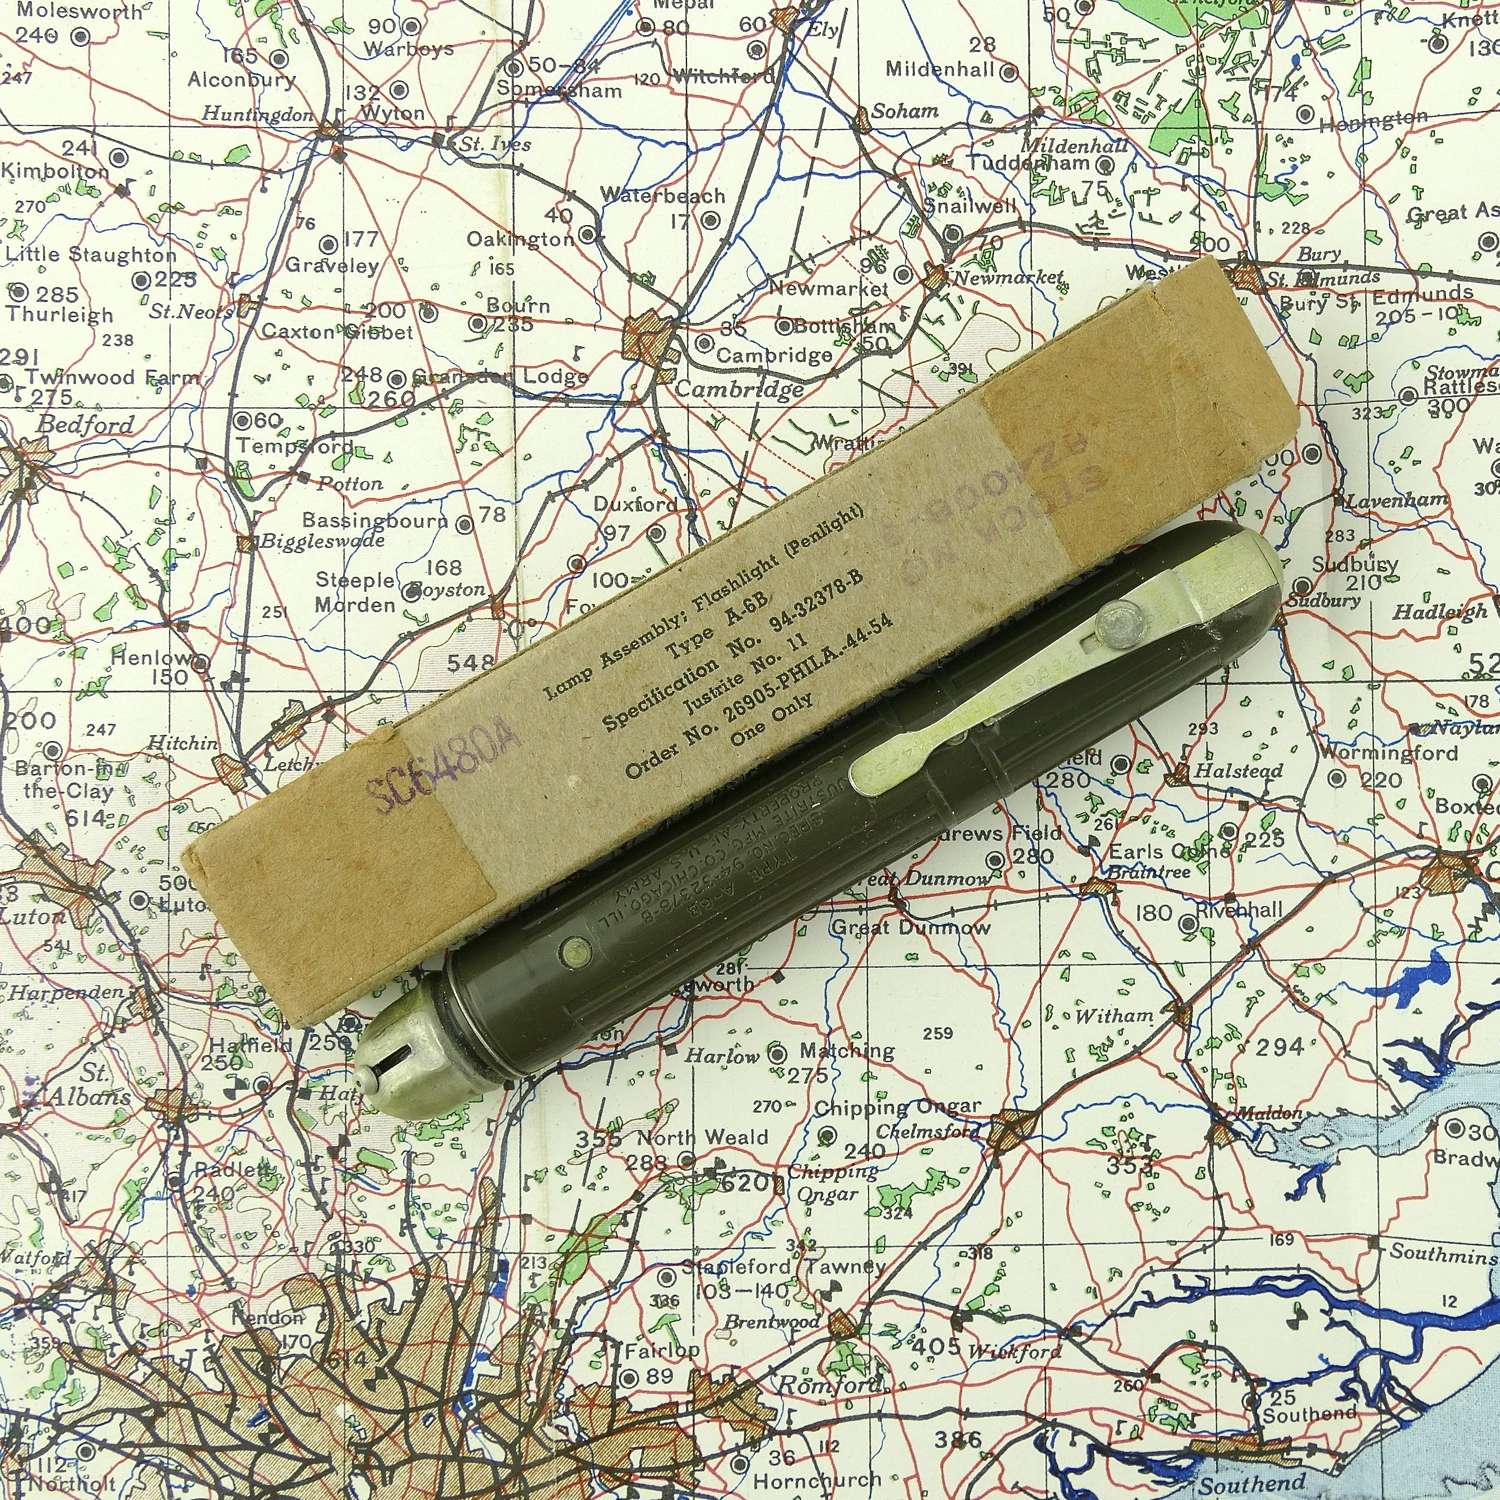 USAAF A-6B penlight, boxed